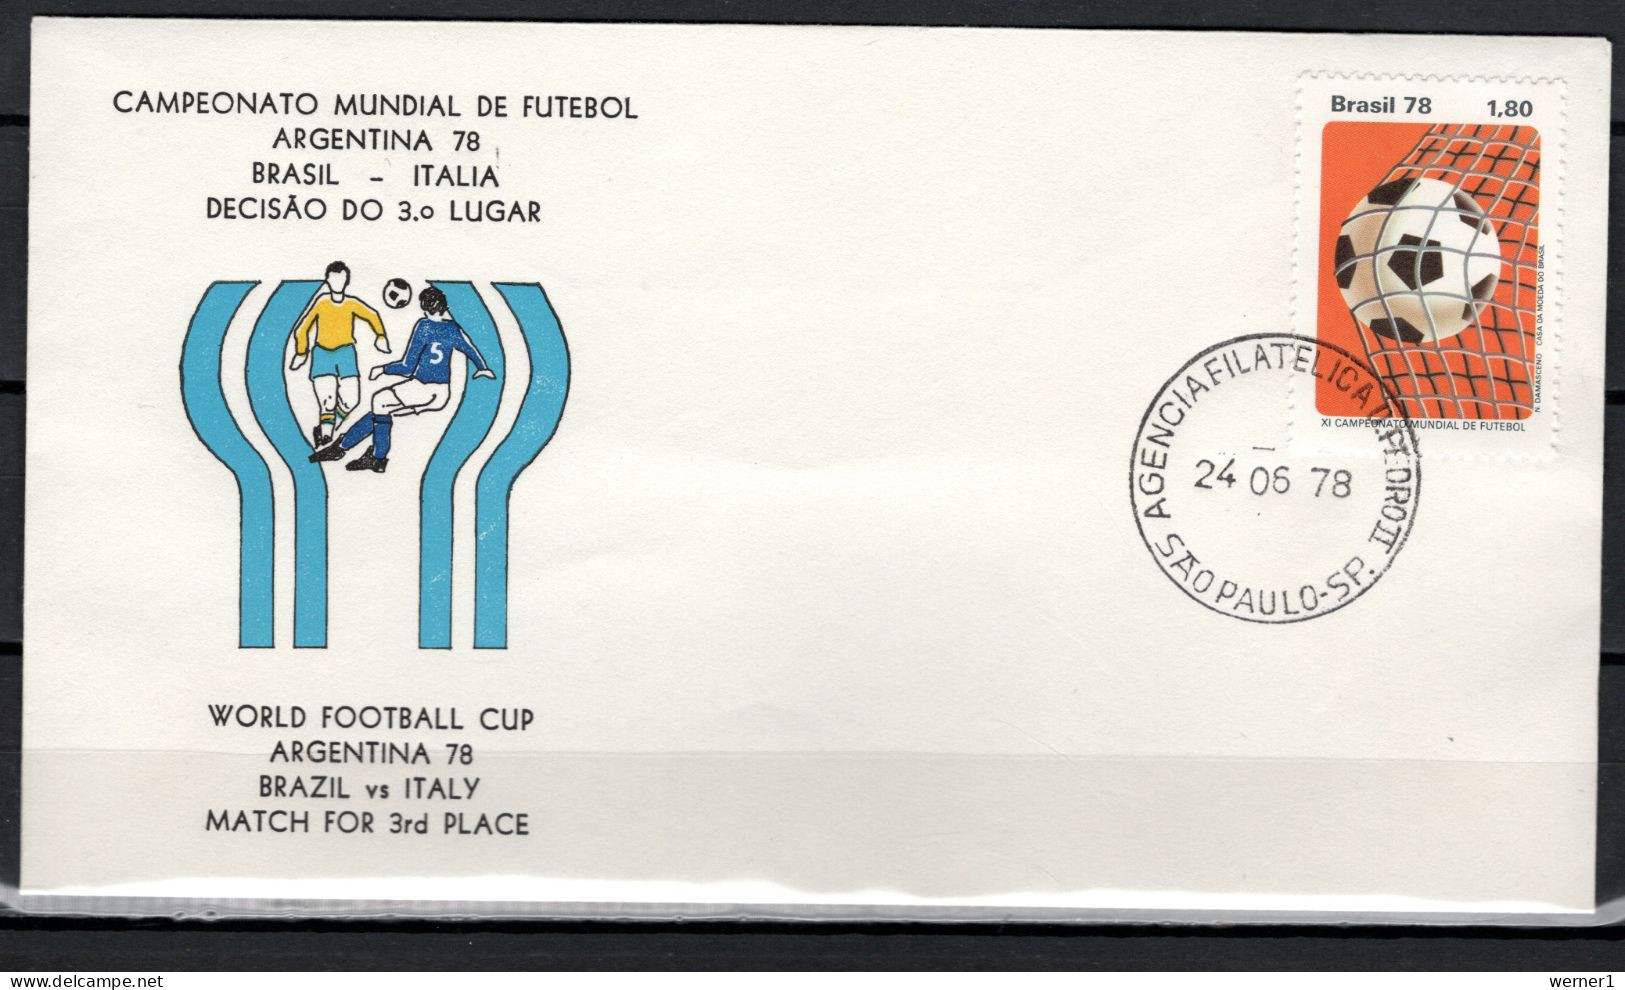 Brazil 1978 Football Soccer World Cup Commemorative Cover Match For 3rd Place Brazil - Italy - 1978 – Argentine